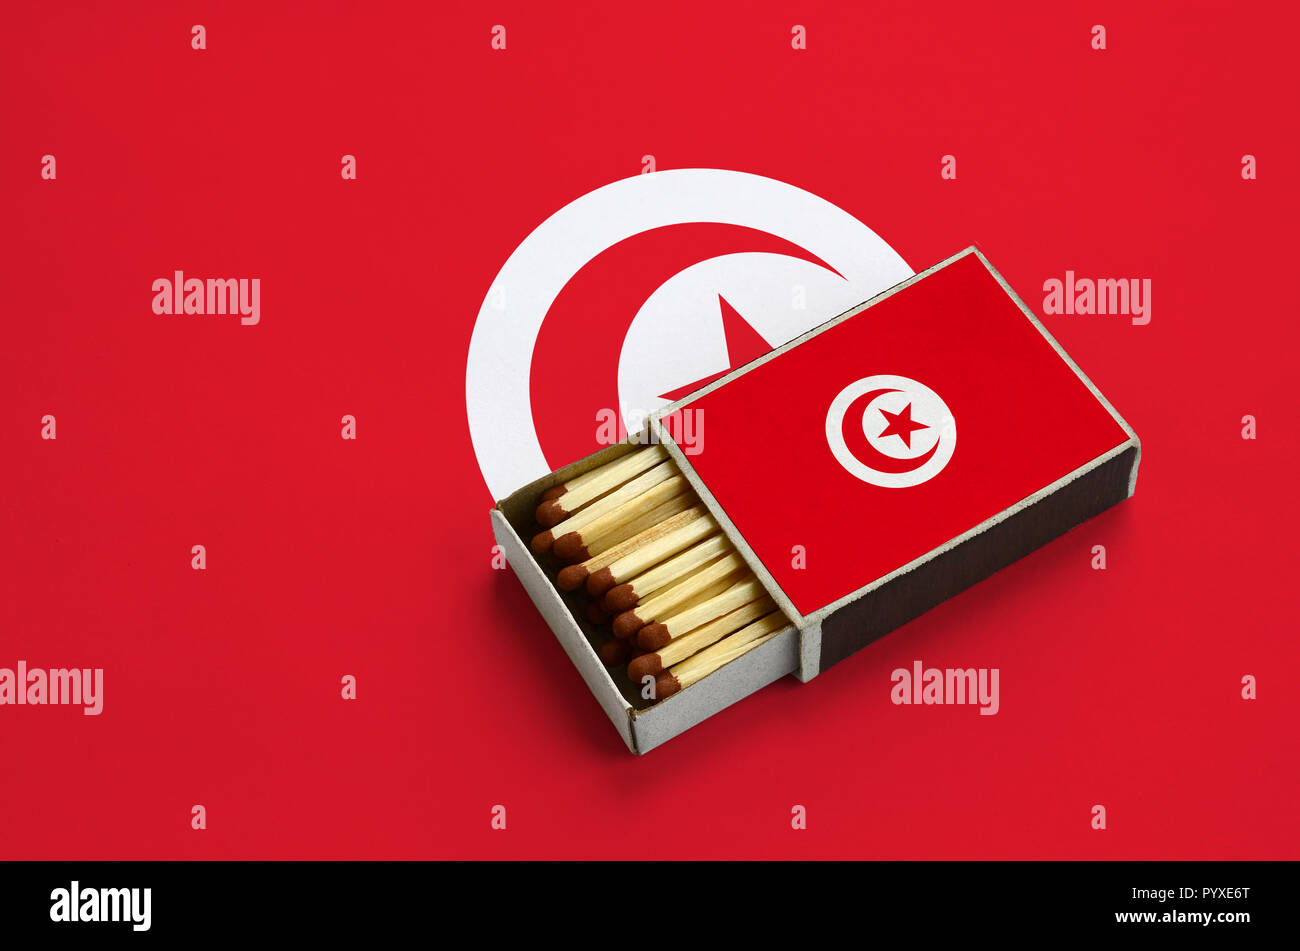 Tunisia flag  is shown in an open matchbox, which is filled with matches and lies on a large flag. Stock Photo